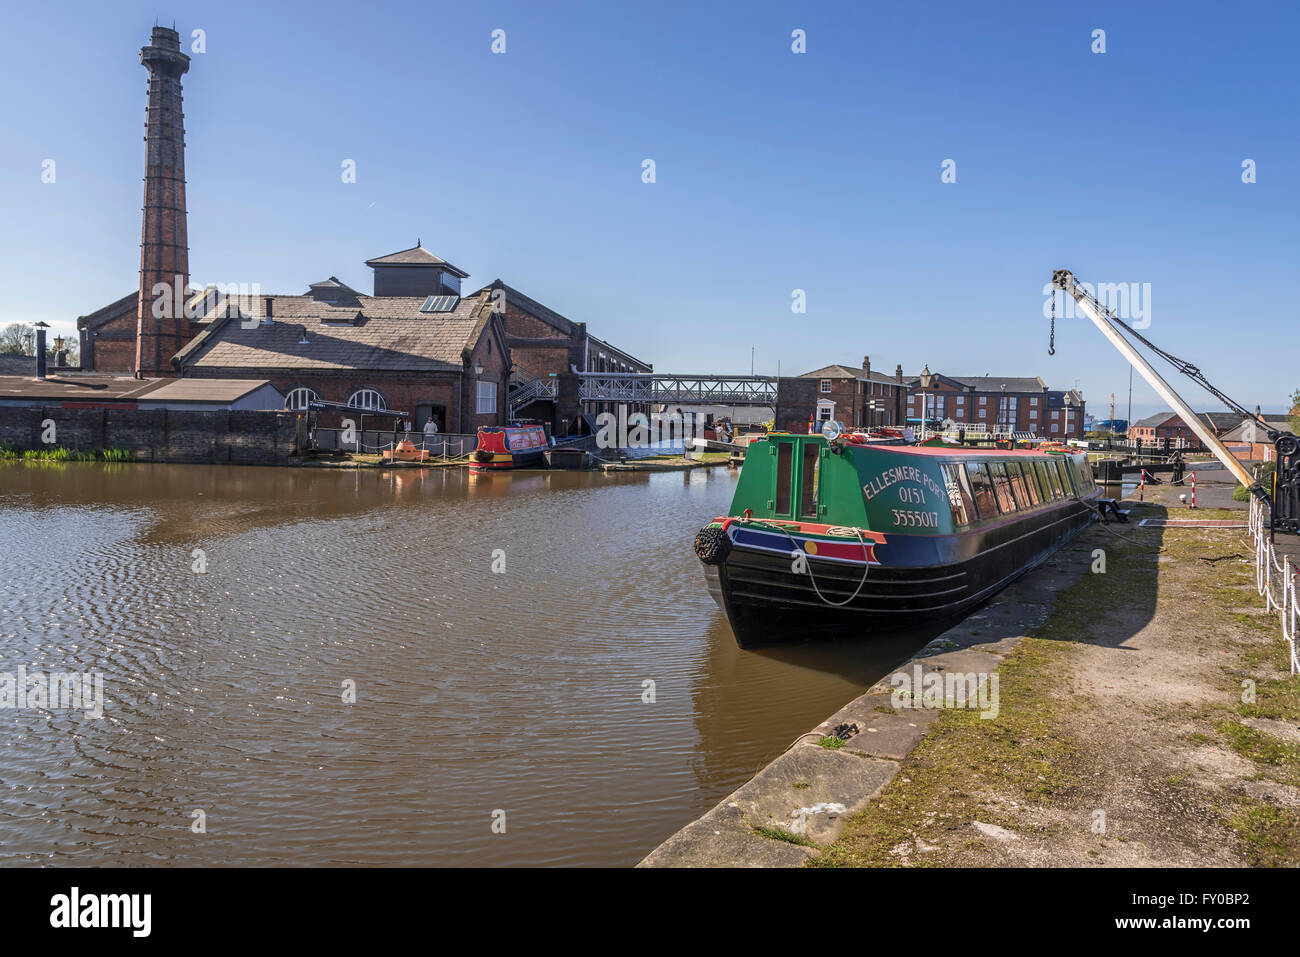 Il National Waterways Museum si trova a Ellesmere Port Cheshire, Inghilterra, Foto Stock